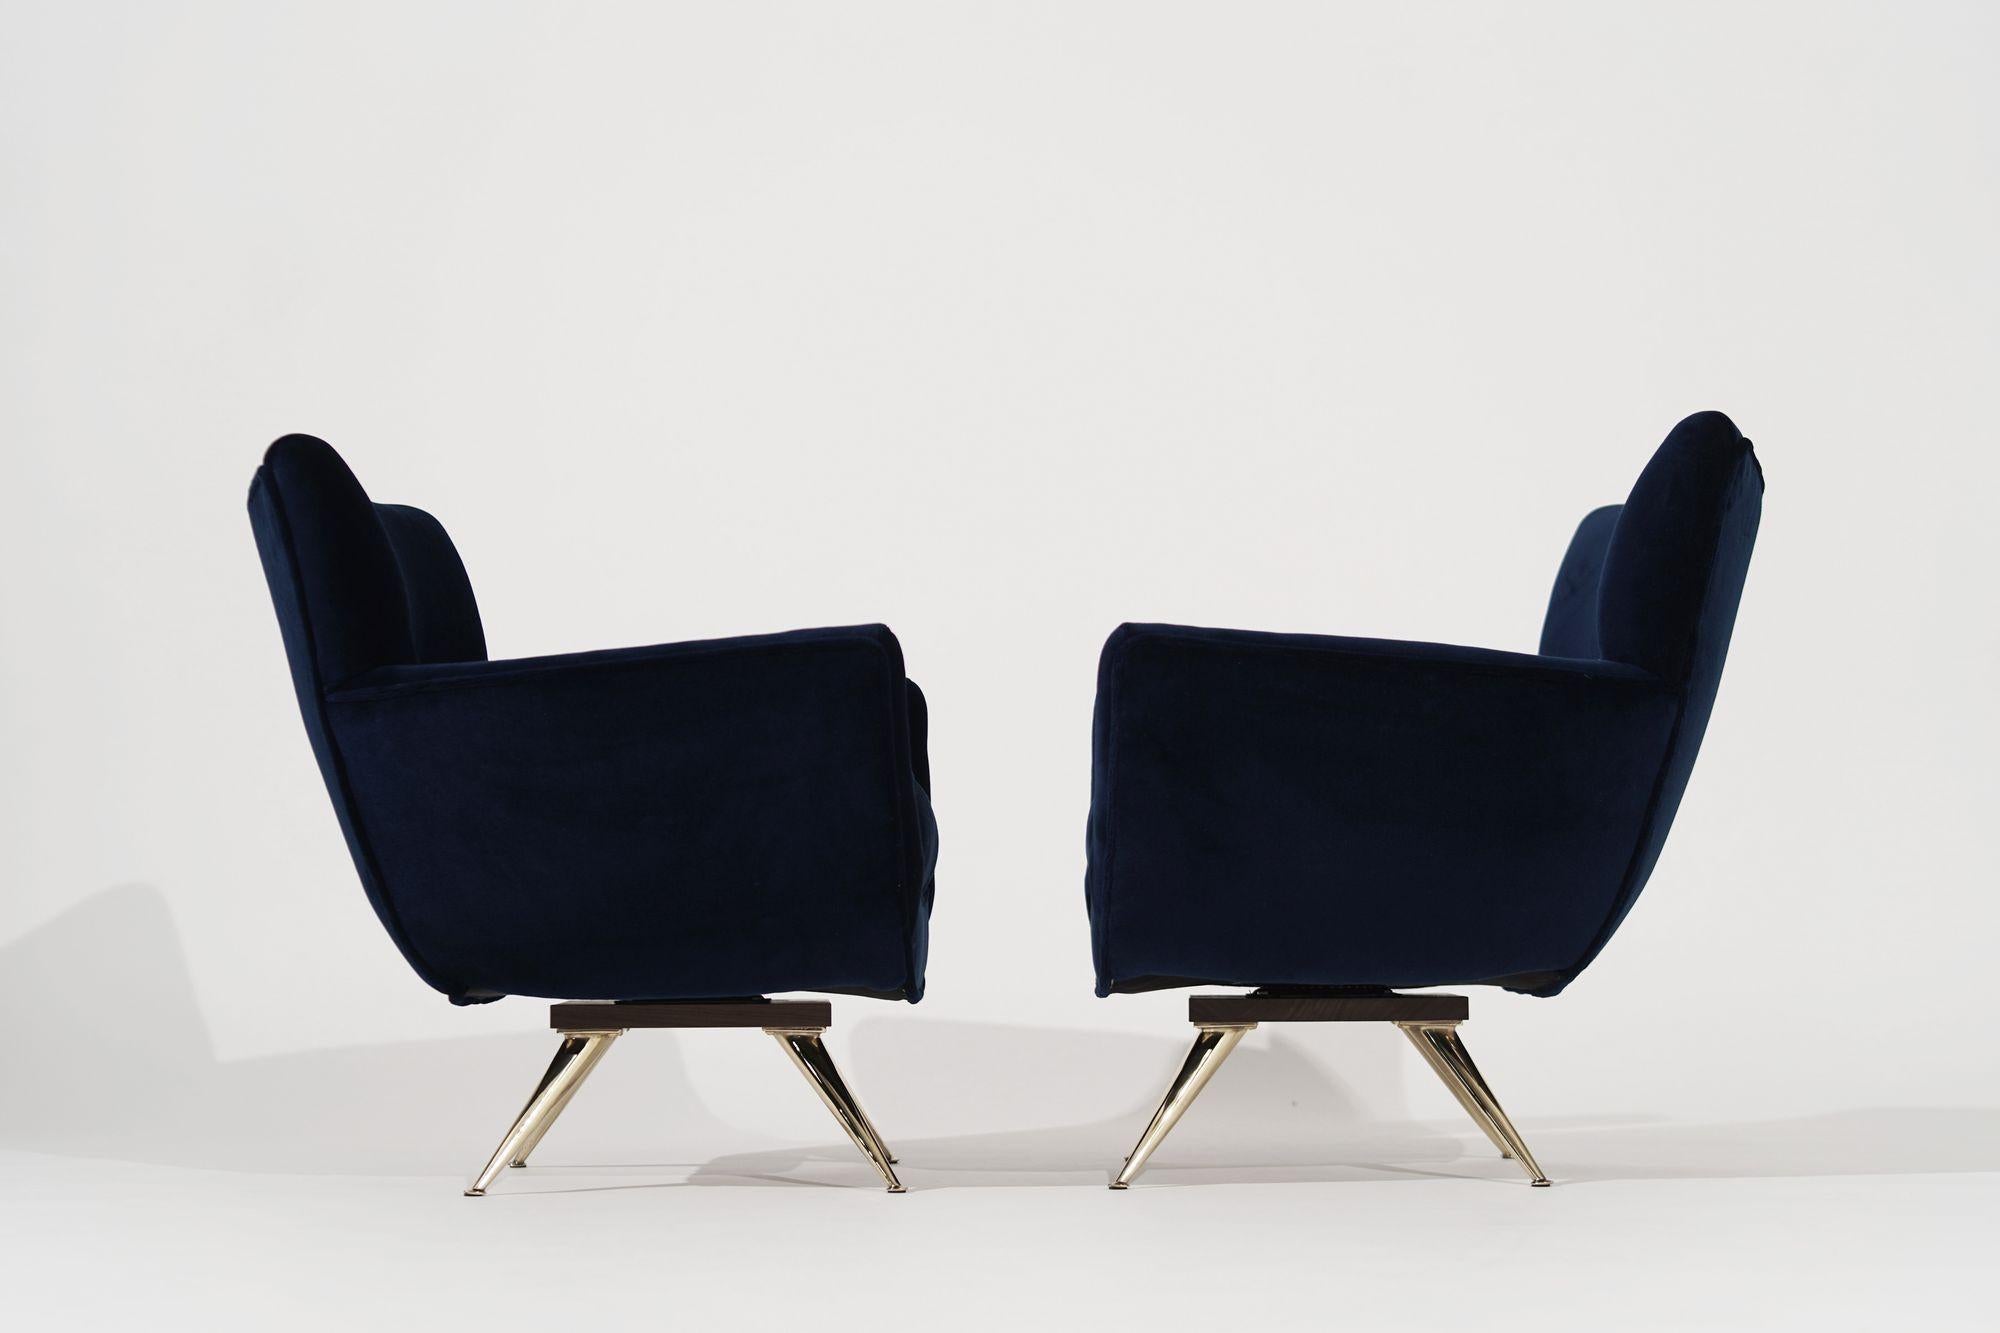 Pair of beautifully restored swivel chairs designed by Henry Glass in the 1950s, now available exclusively from Stamford Modern. These chairs have been expertly restored to their original condition, with a contemporary twist that will elevate any